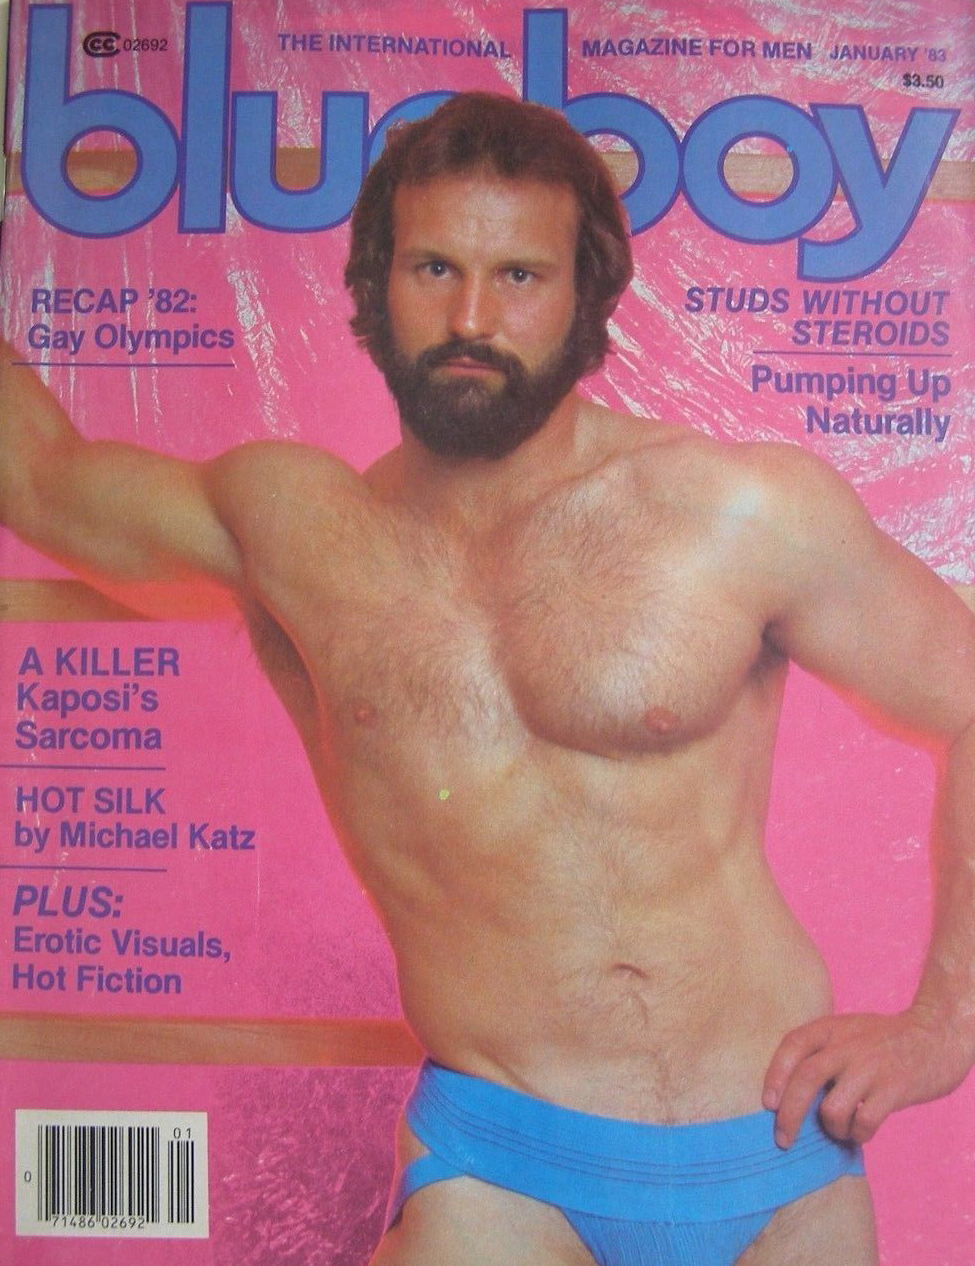 Blueboy January 1983 magazine back issue Blueboy magizine back copy Blueboy January 1983 Gay Mens Magazine Back Issue Publishing Photos of Naked Men. Studs Without Steroids Pumping Up Naturally.